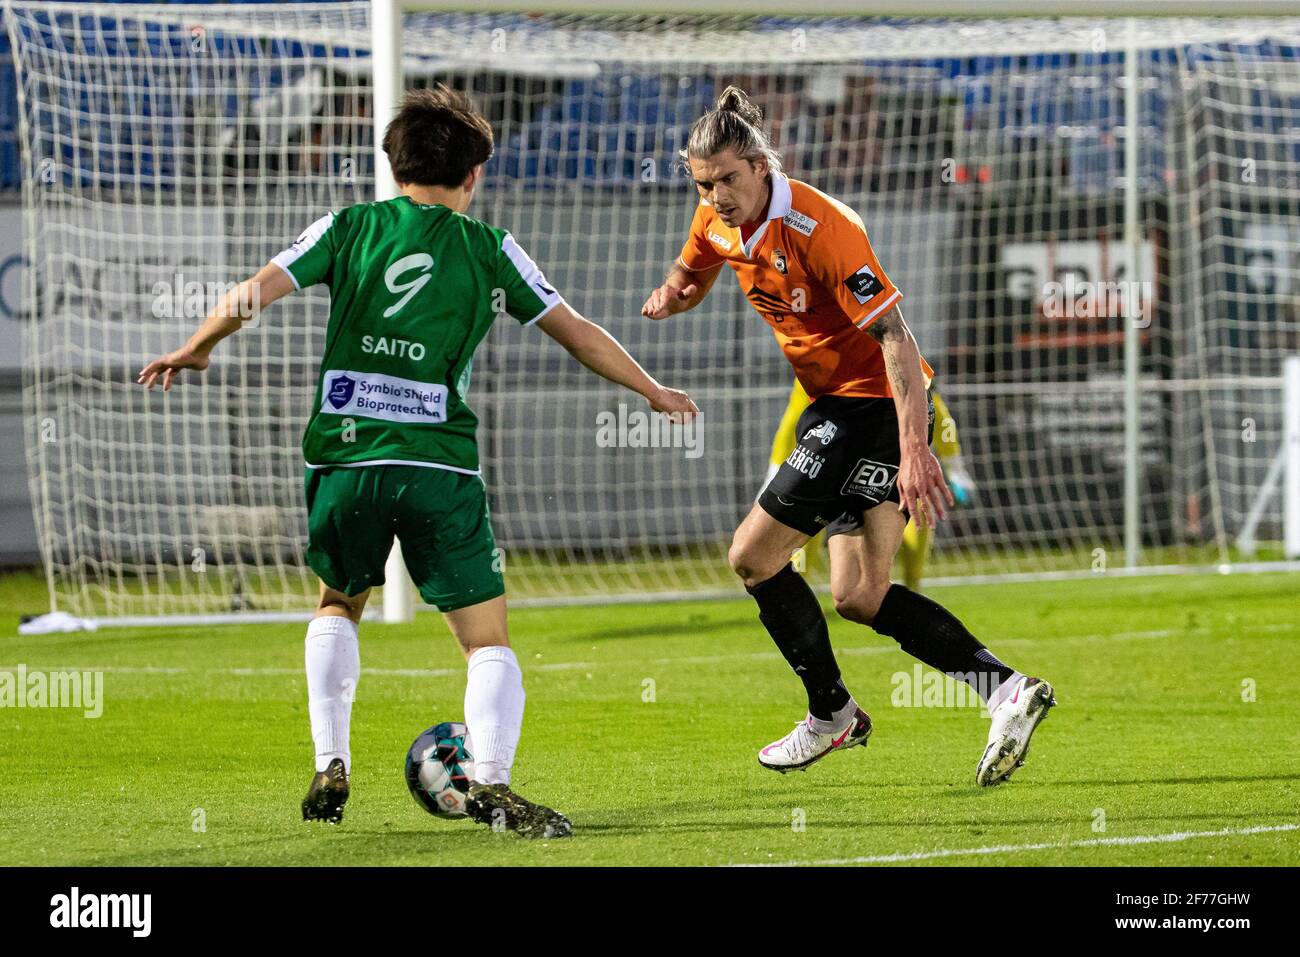 Lommel's Koki Saito and Deinze's Seth De Witte fight for the ball during a soccer match between KMSK Deinze and Lommel SK, Monday 05 April 2021 in Dei Stock Photo